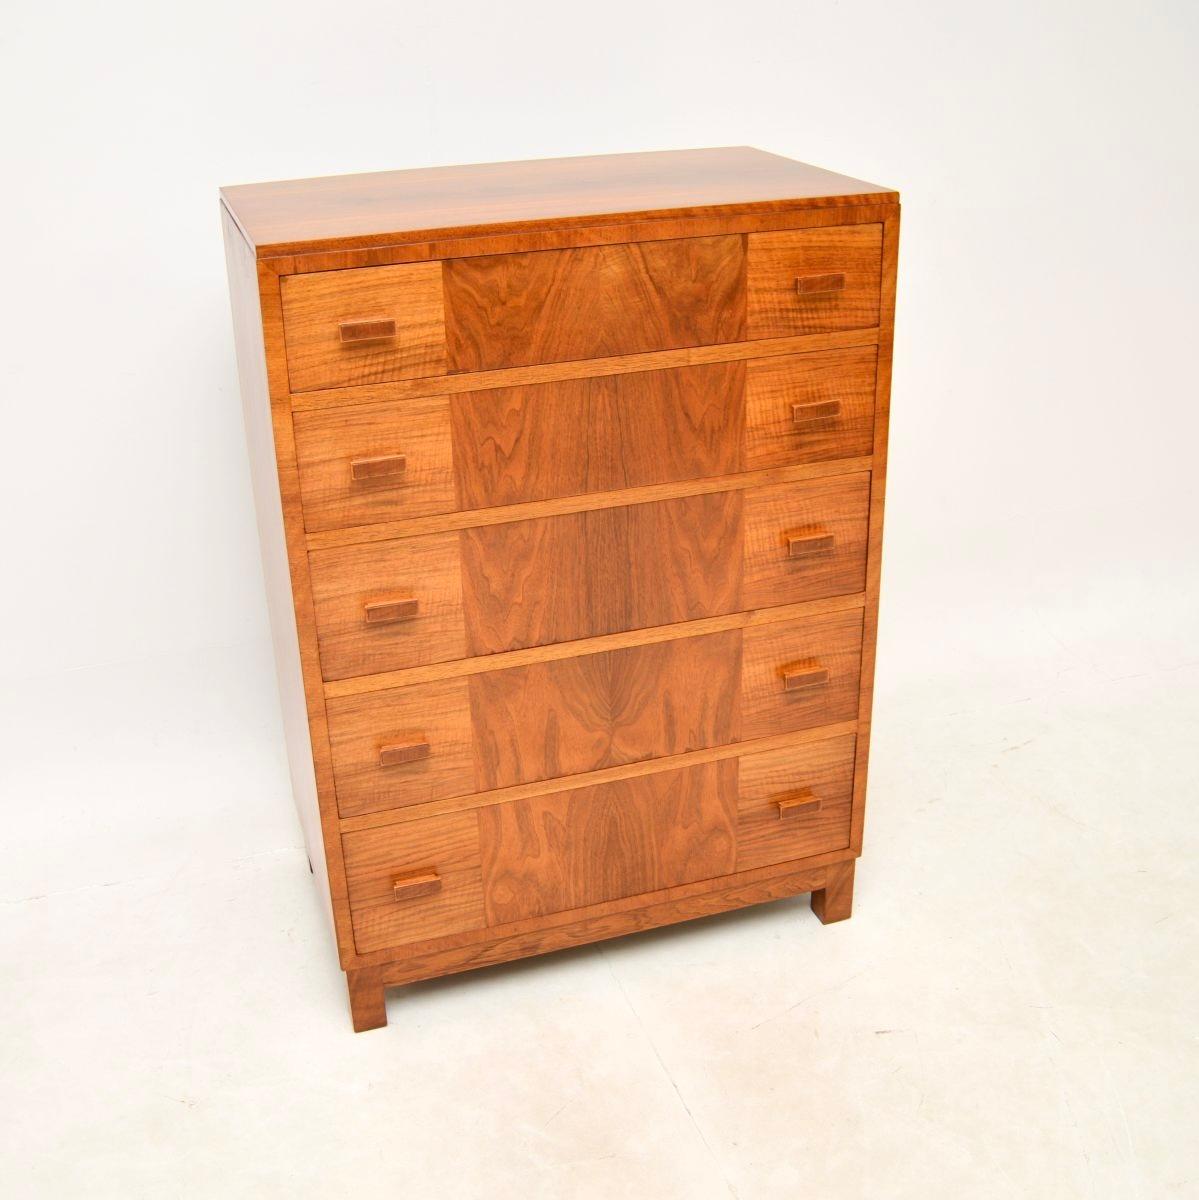 A stylish and extremely well made Art Deco walnut chest of drawers by Heal’s. This was made by and retailed in Heal’s in the 1920-30’s.

The quality is exceptional, with a very solid construction and gorgeous walnut grain patterns. There is lots of